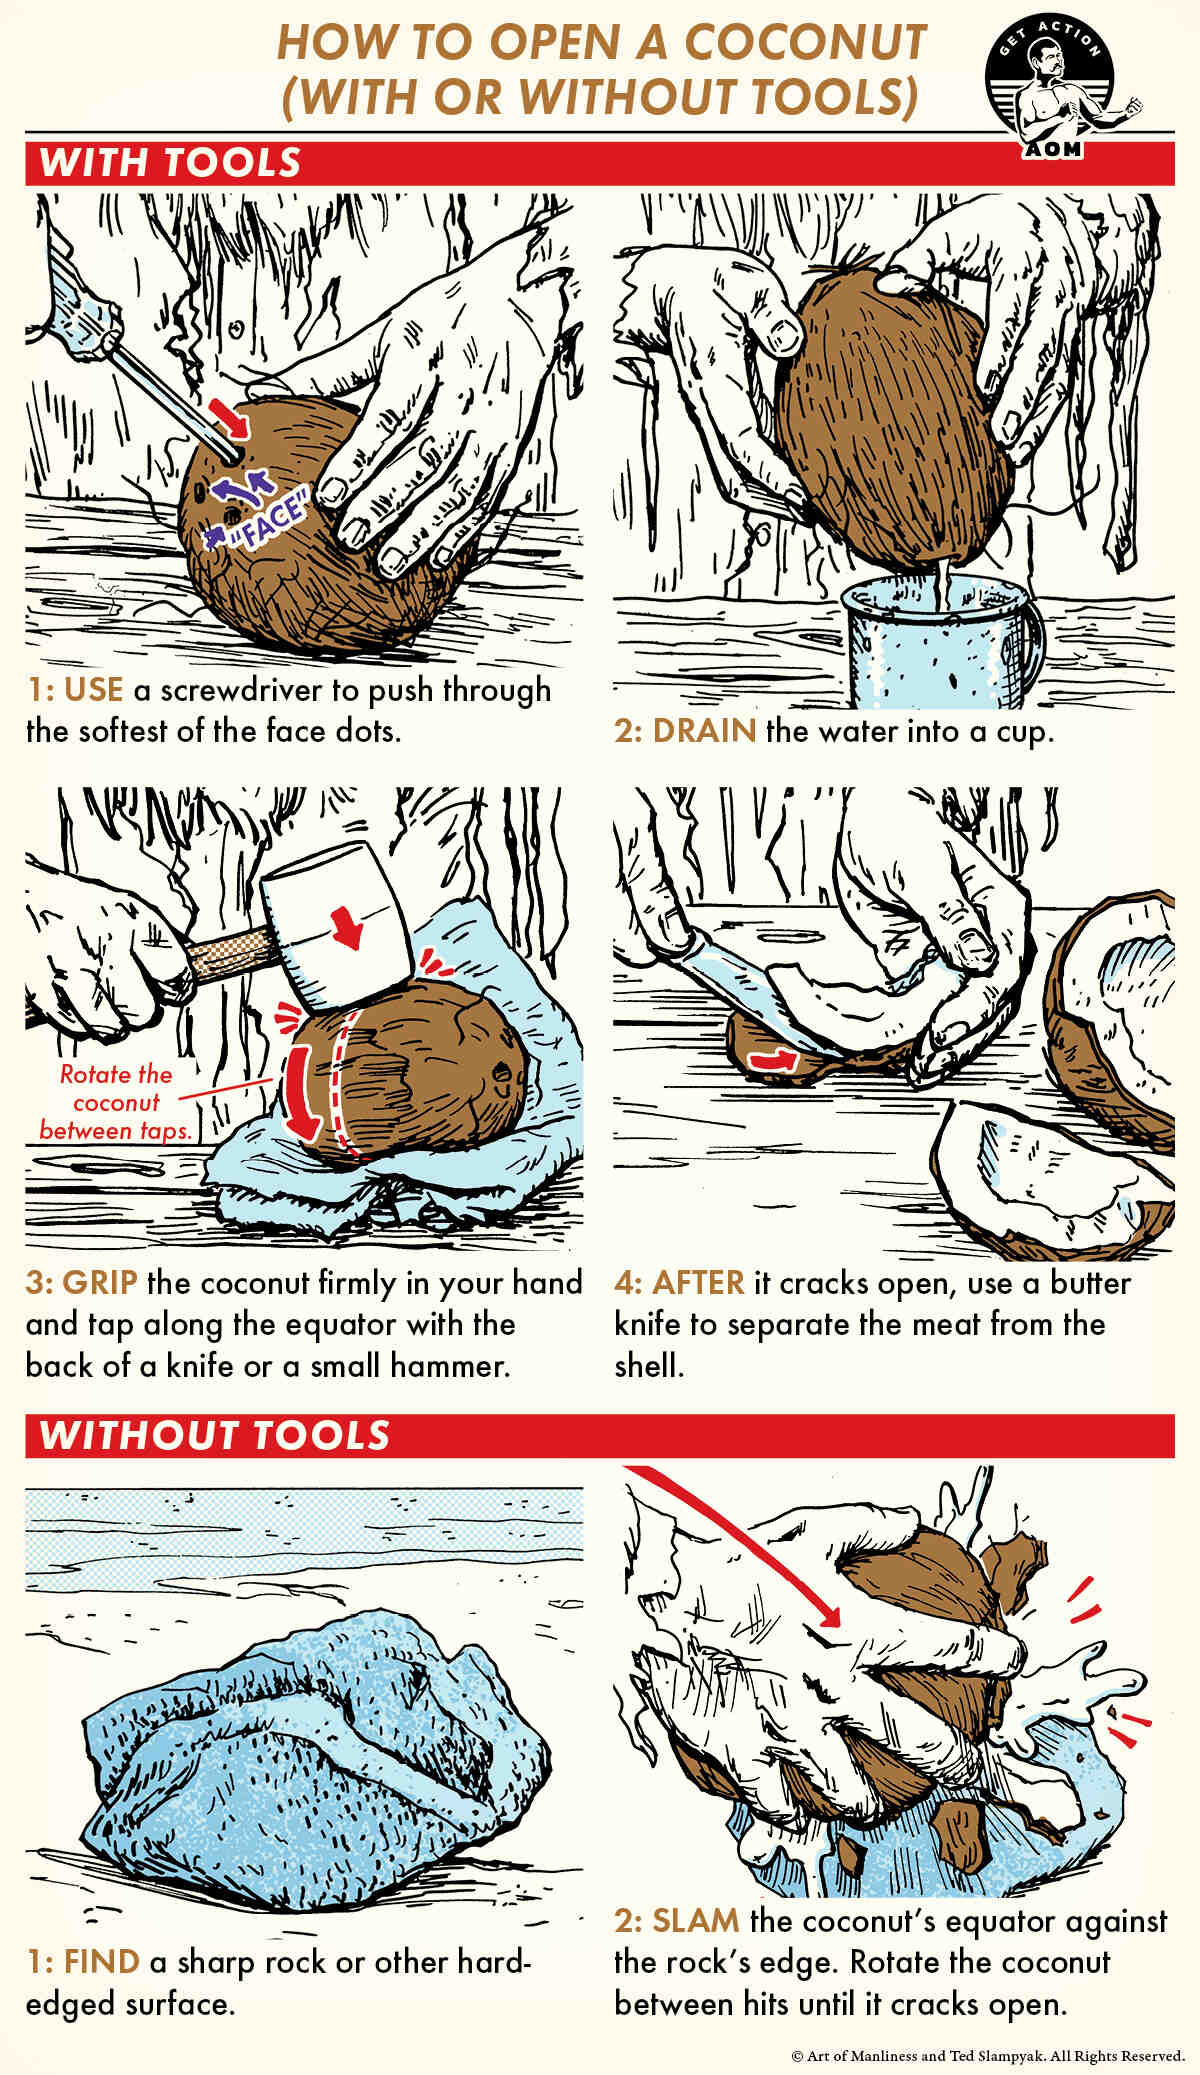 How do you open a coconut without breaking the shell?